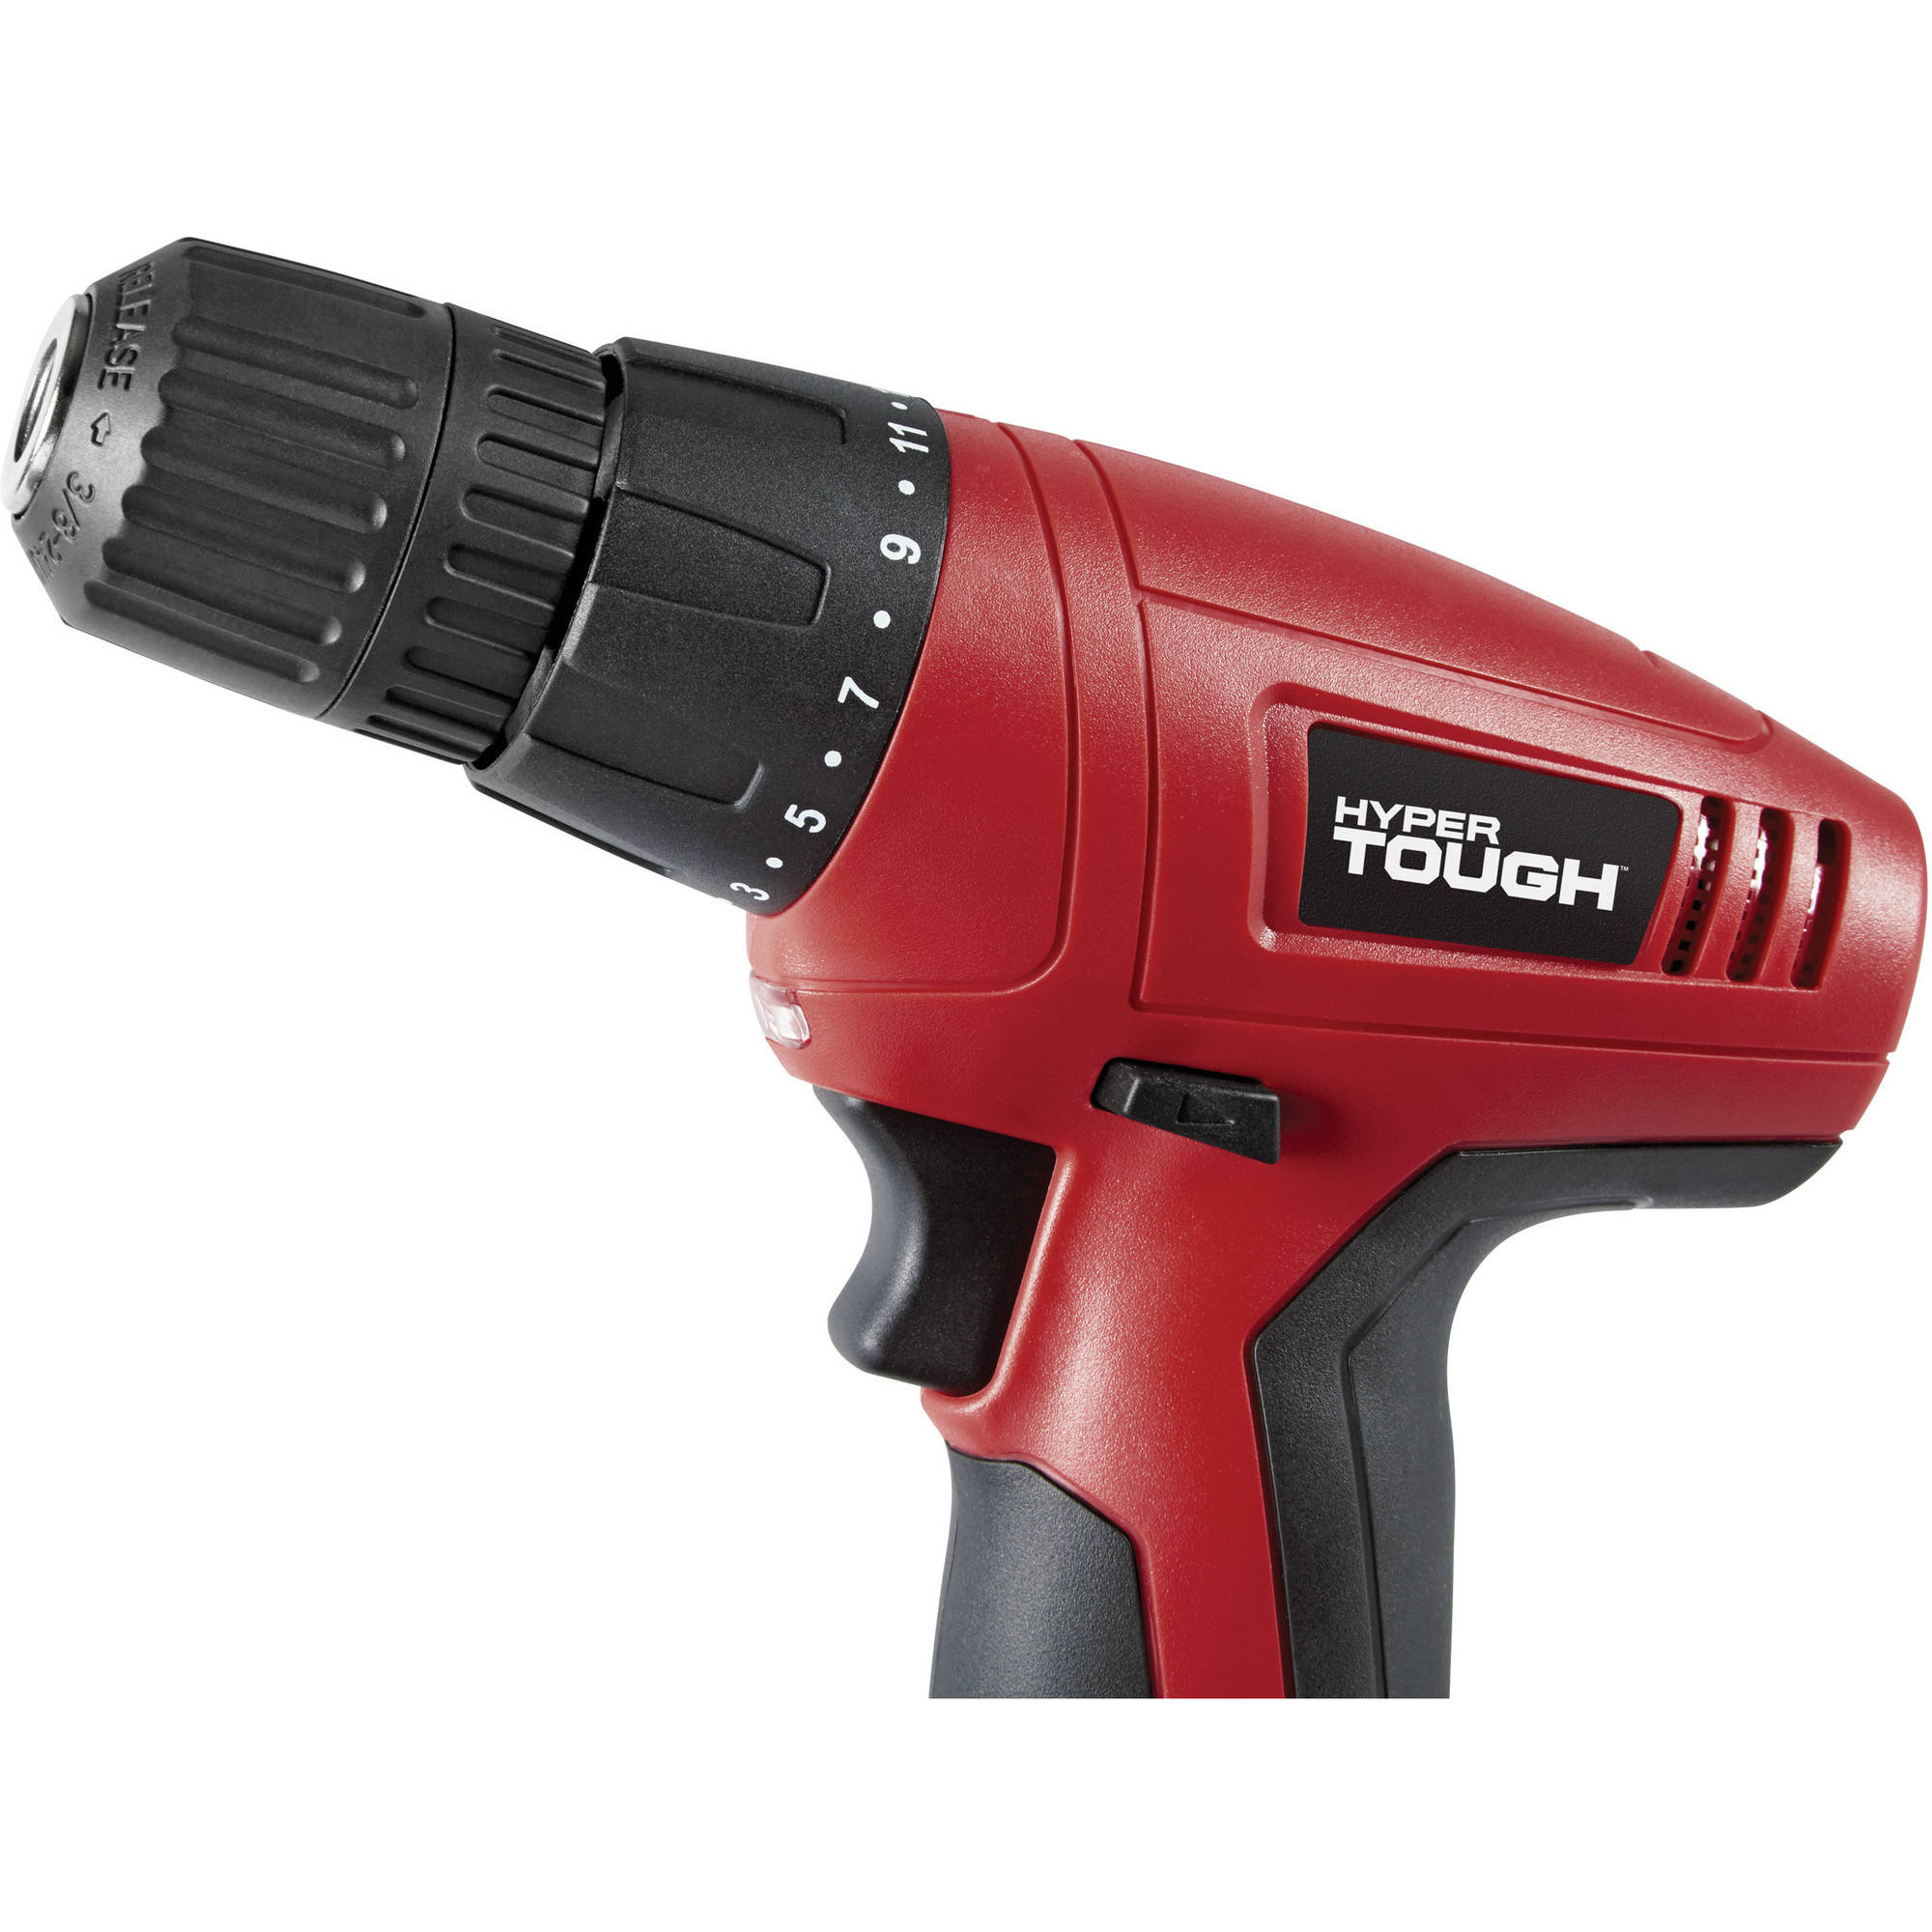 Hyper Tough 5241.41 12V Cordless Drill with 100 Piece Project Kit - image 2 of 5